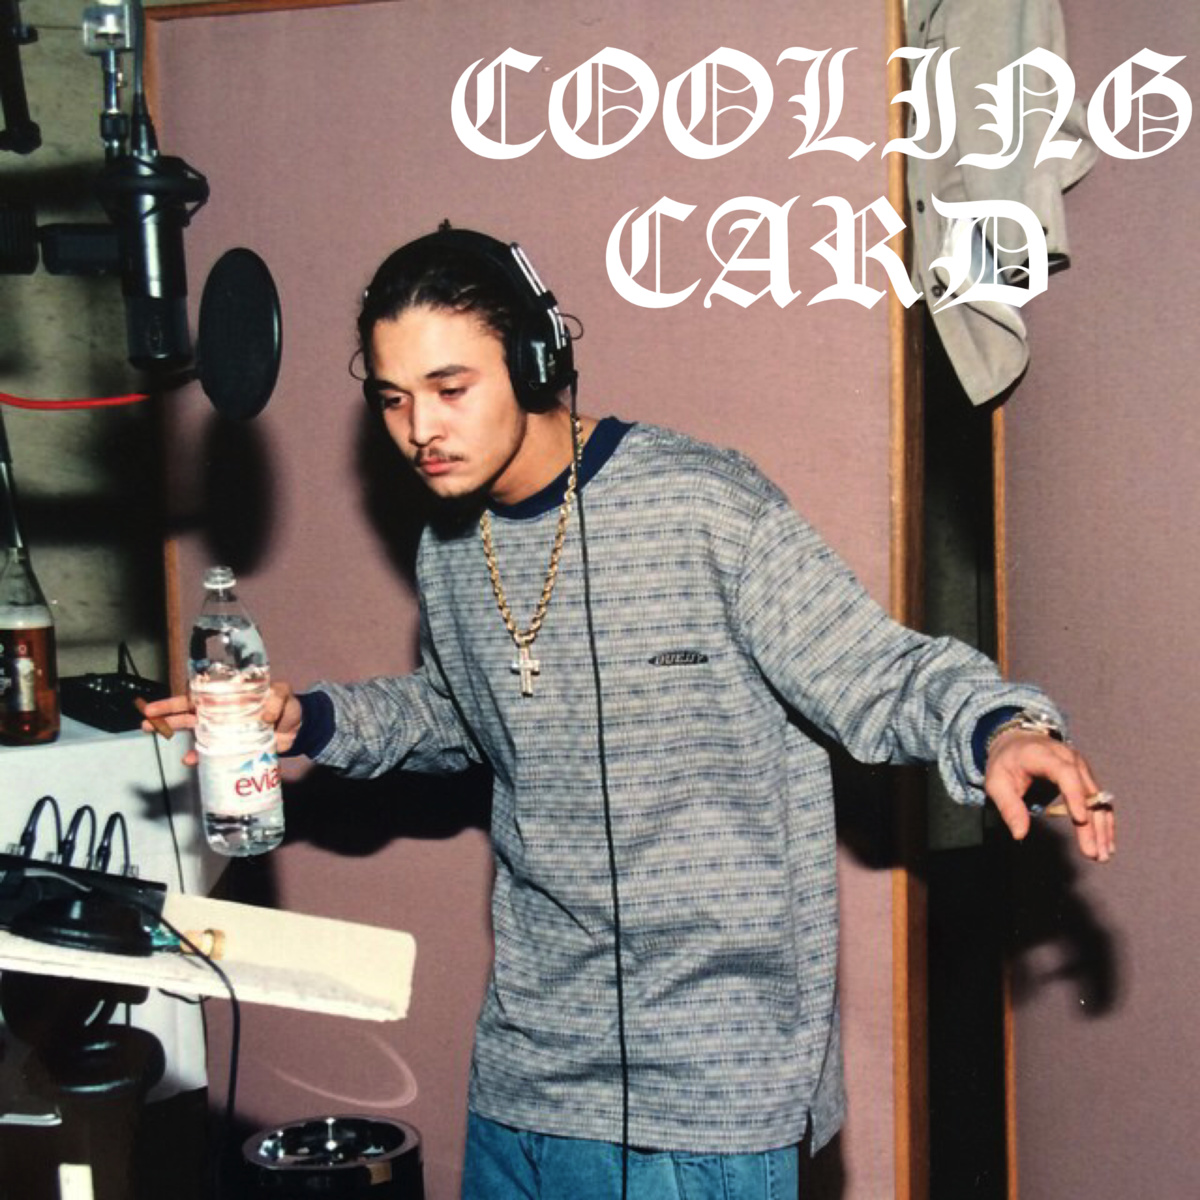 Cooling Card Drops Shoe-Gaze Track, “All of Lost”